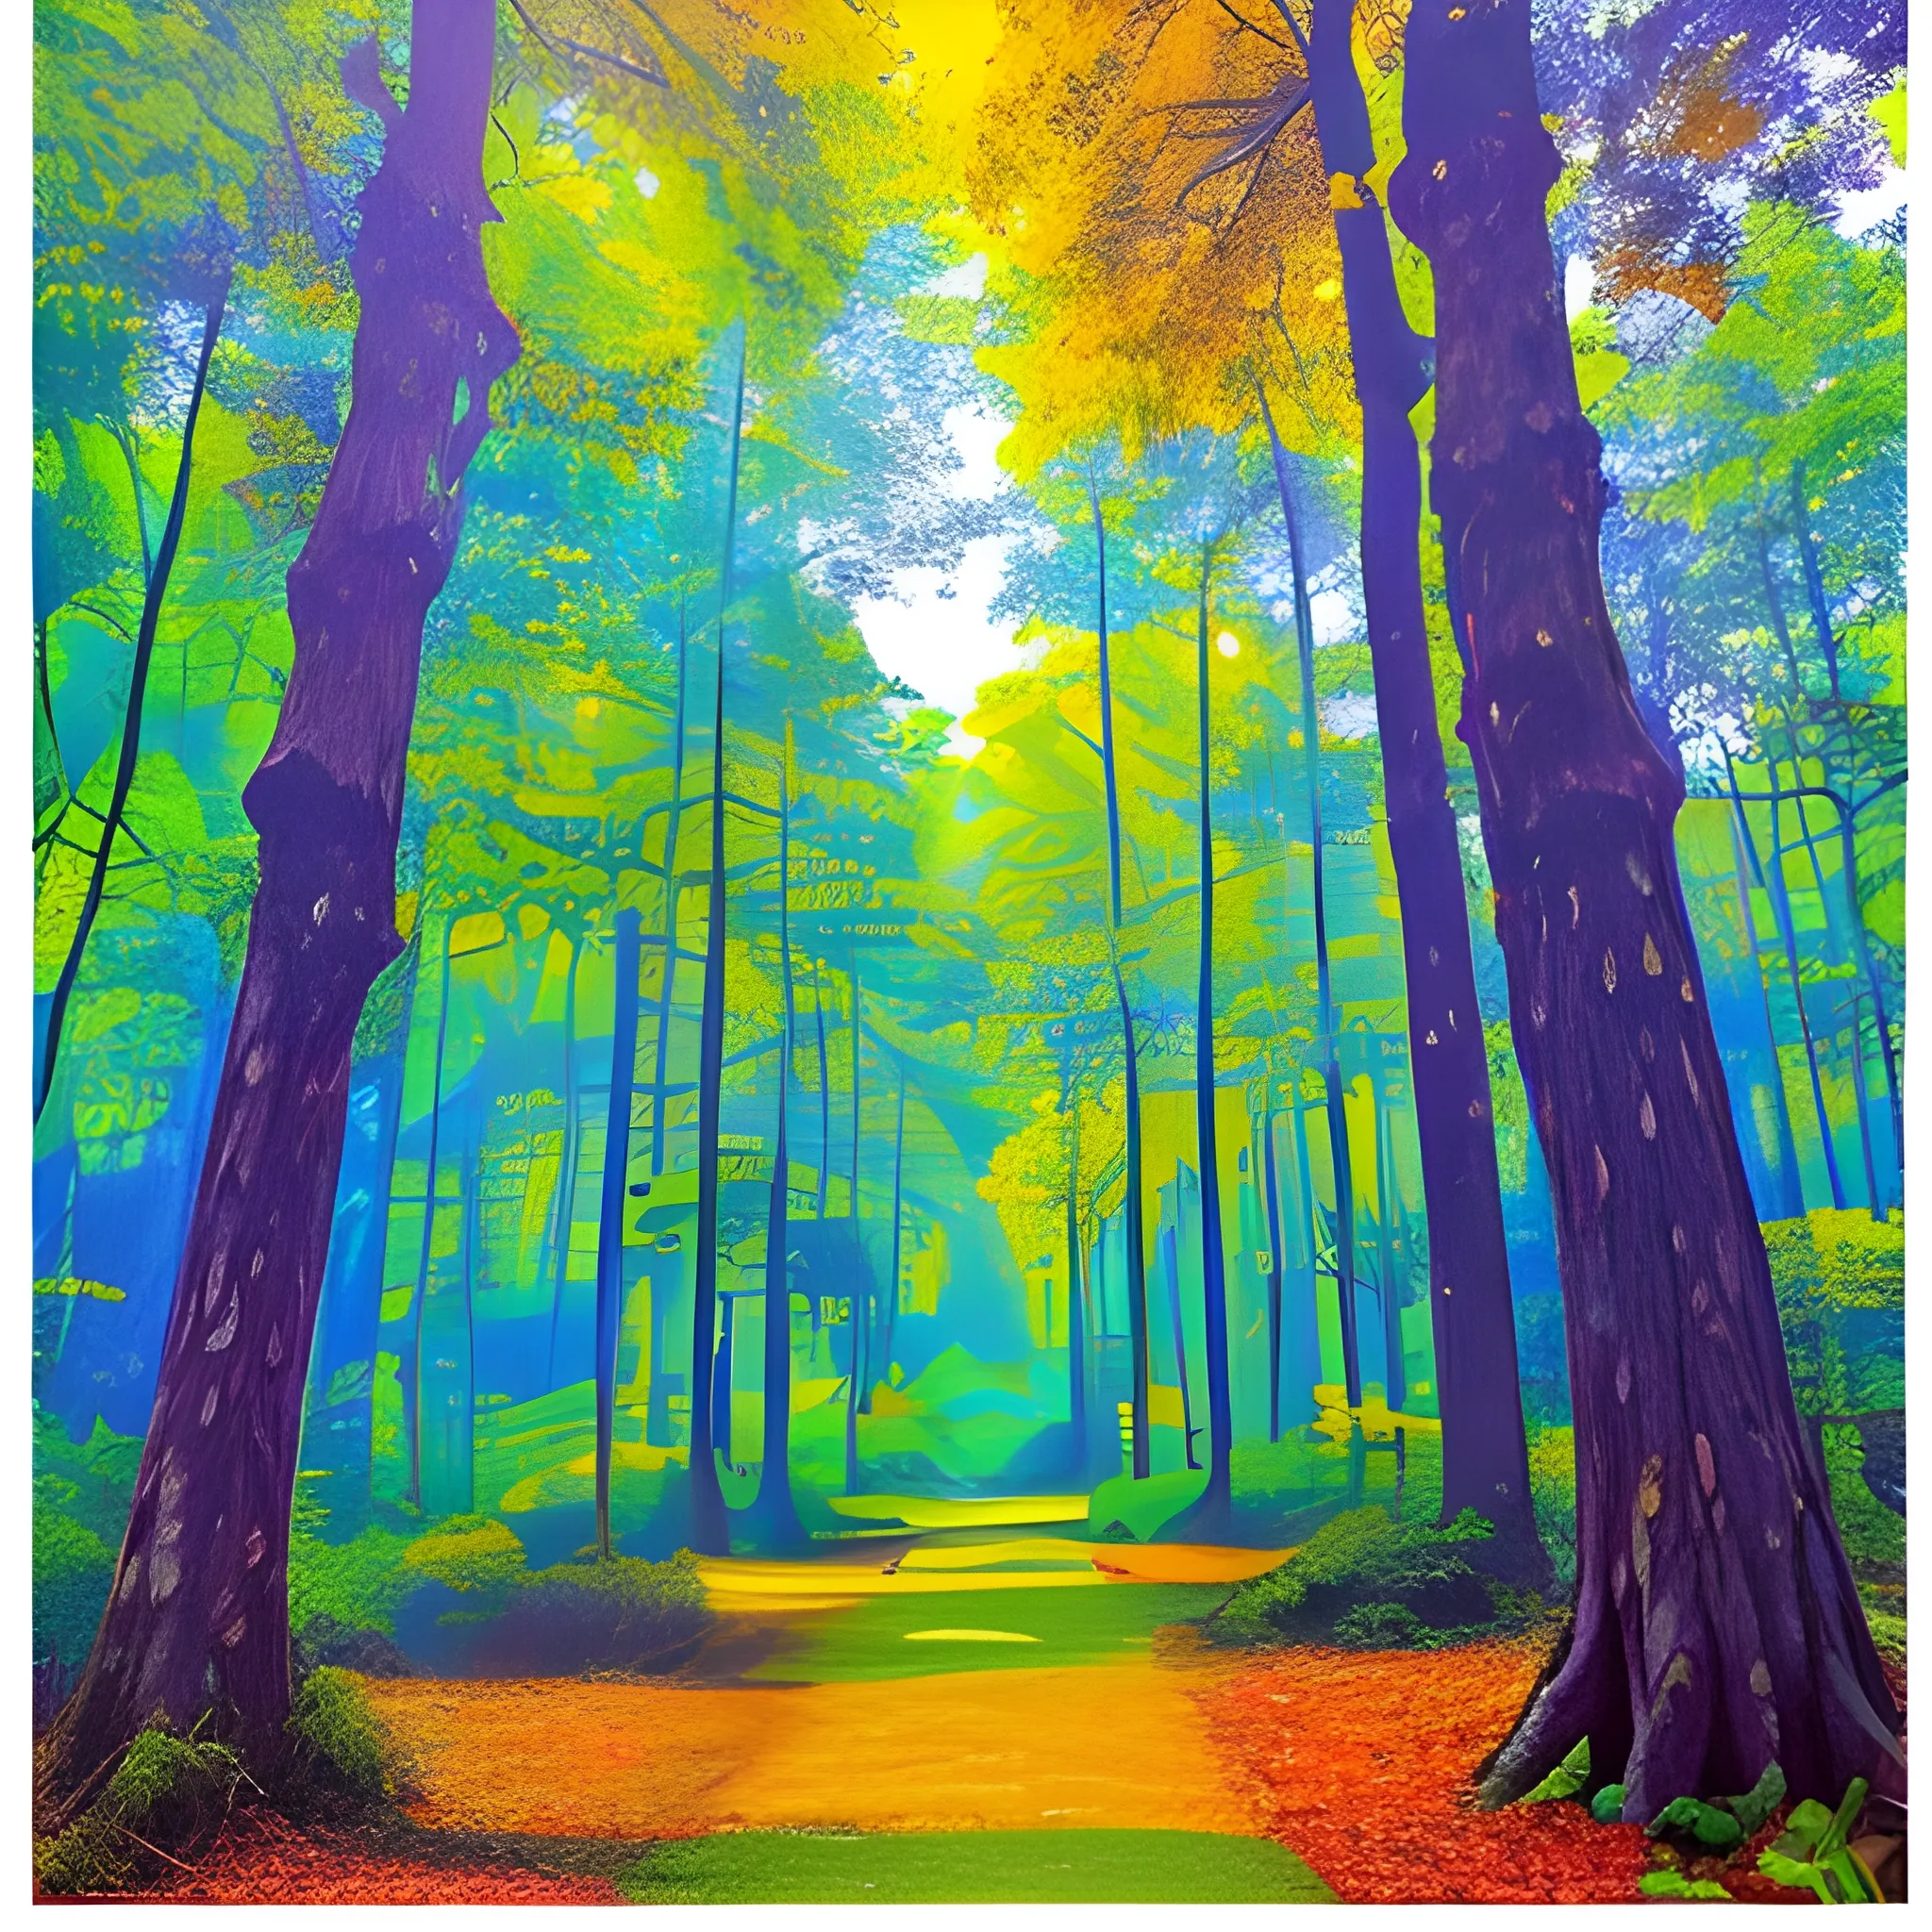 very beautiful forest coloring, blue, yellow, green, purple, orange,,red, book page